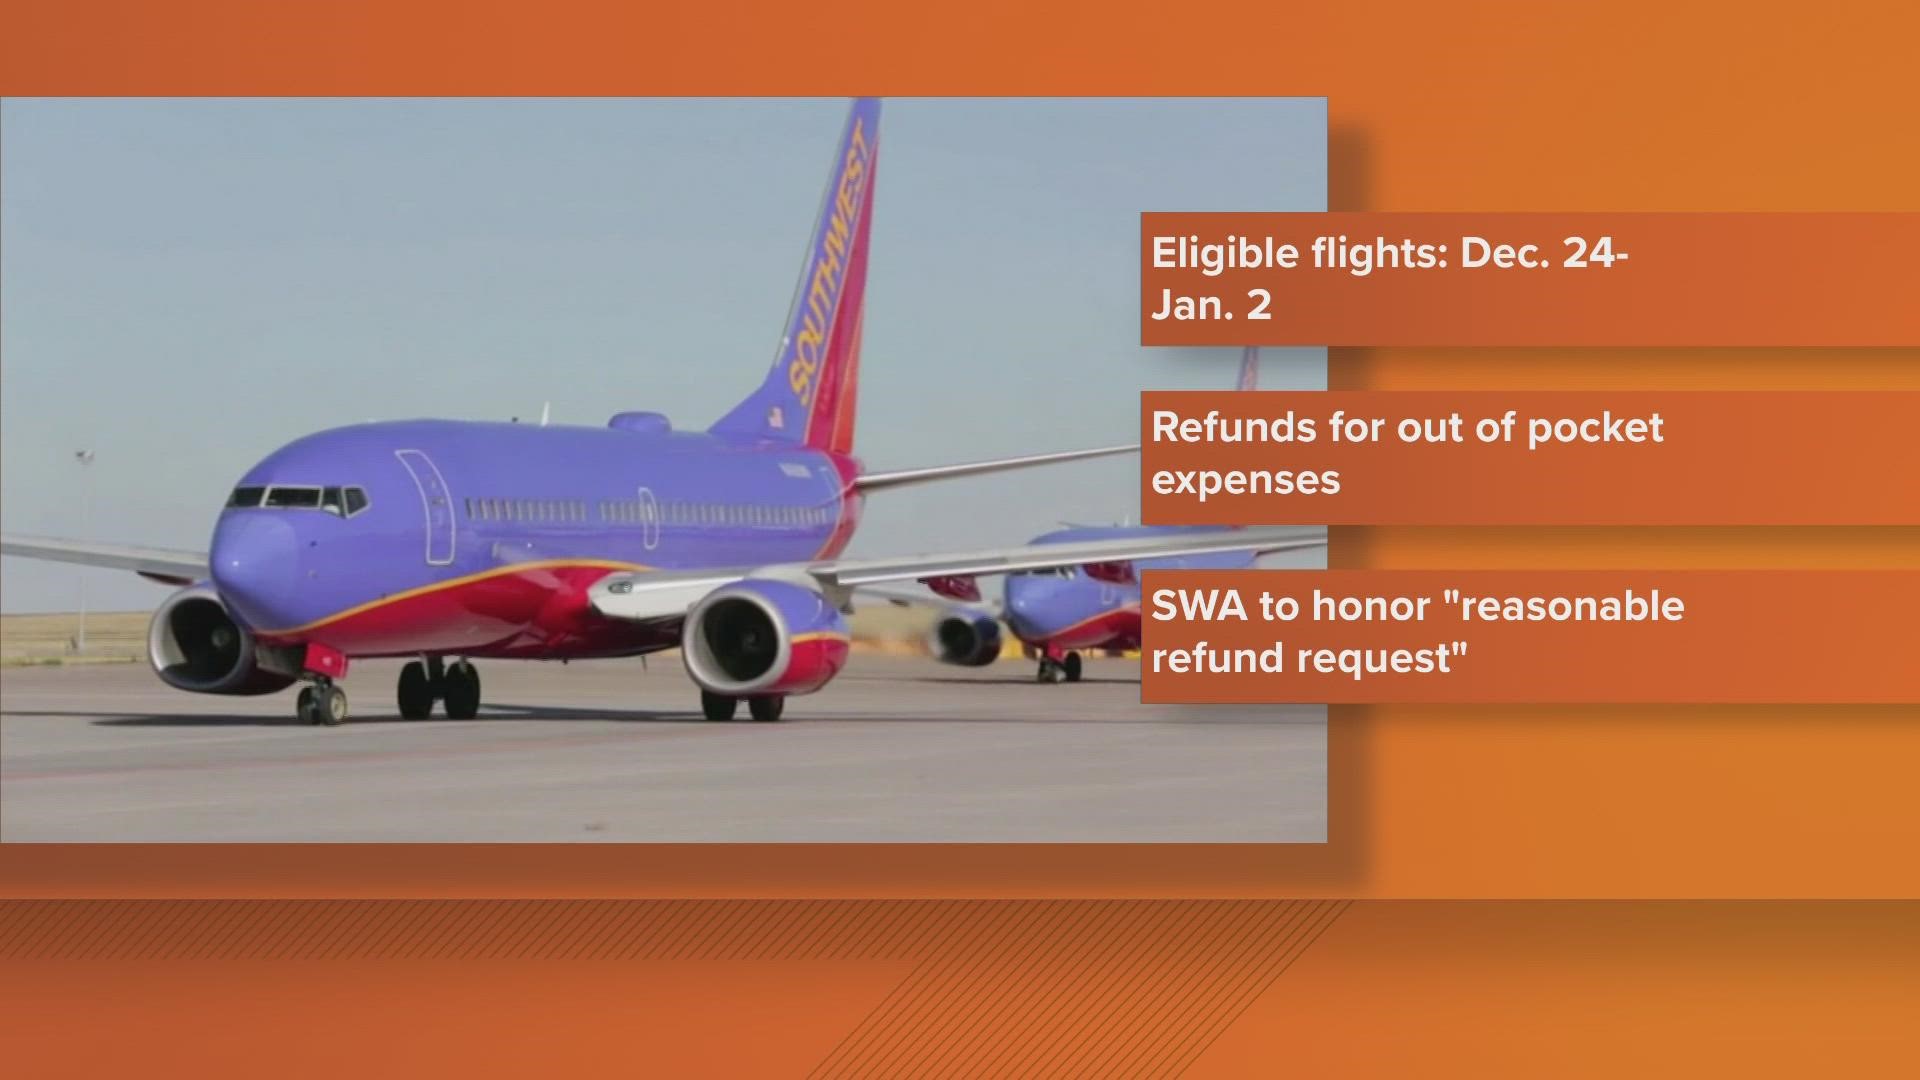 Southwest continues to address it's wide-scale disruptions after it claimed severe winter weather hampered its operations.